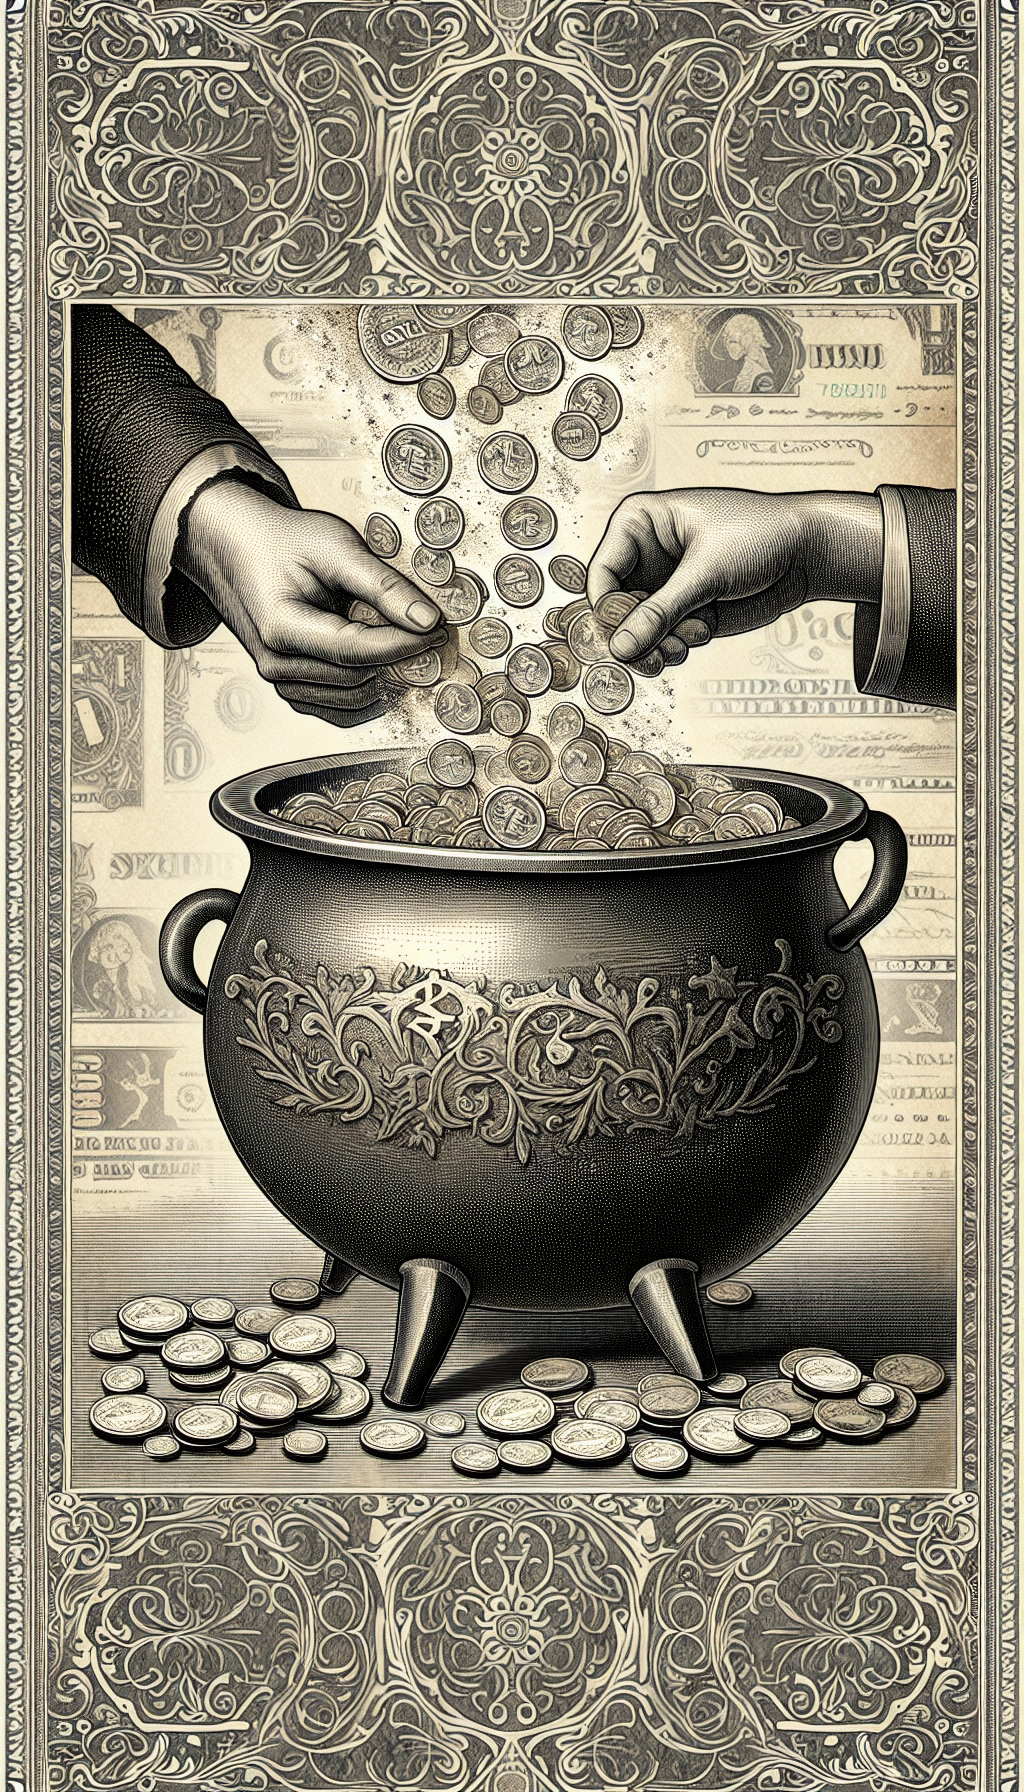 An elegantly etched illustration shows hands exchanging a hefty, ornate cast iron cauldron over a faded backdrop of currency, with golden coins pouring from the cauldron's mouth like magic potion, signifying the value of the antique. The border is adorned with intricate patterns reminiscent of vintage filigree, emphasizing the timeless worth of the investment.